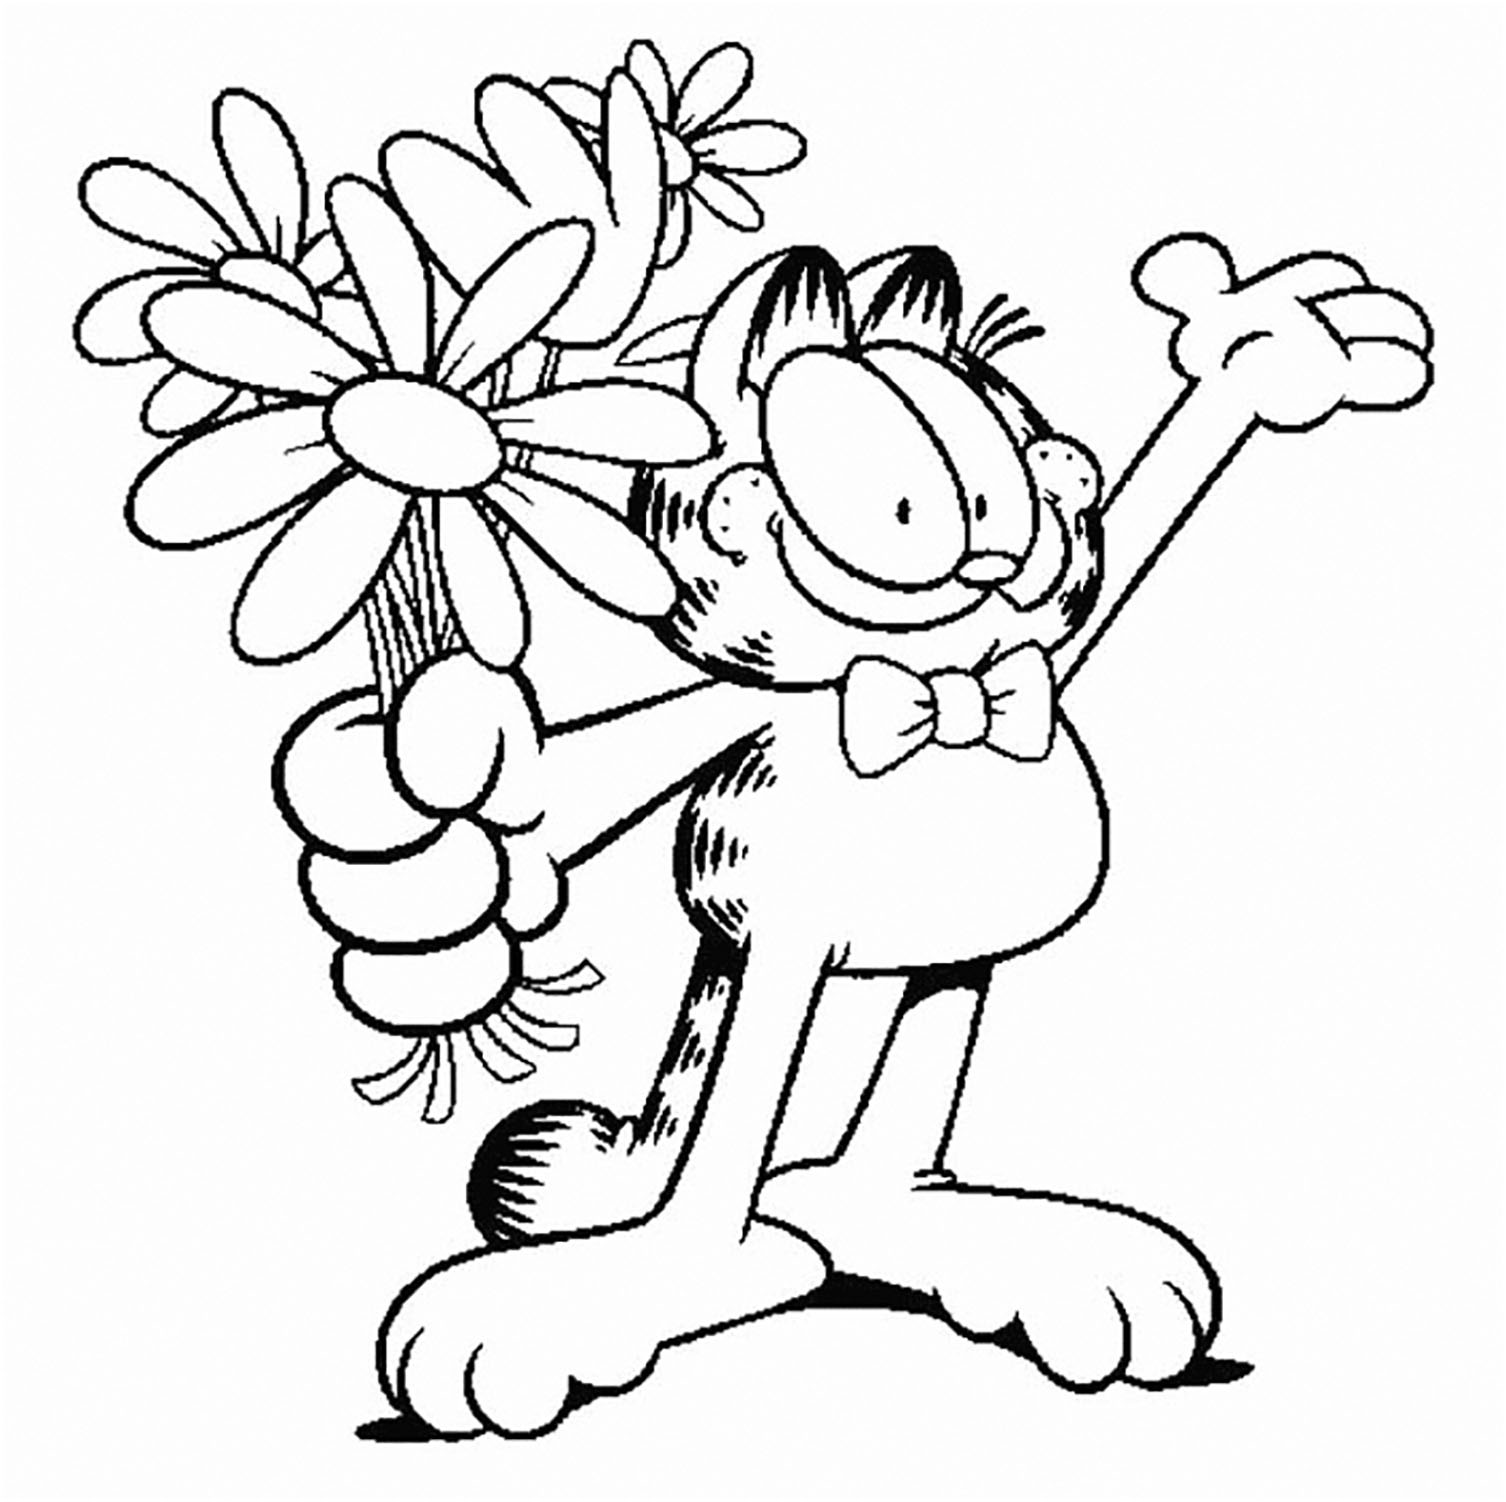 Garfield for kids   Garfield Kids Coloring Pages